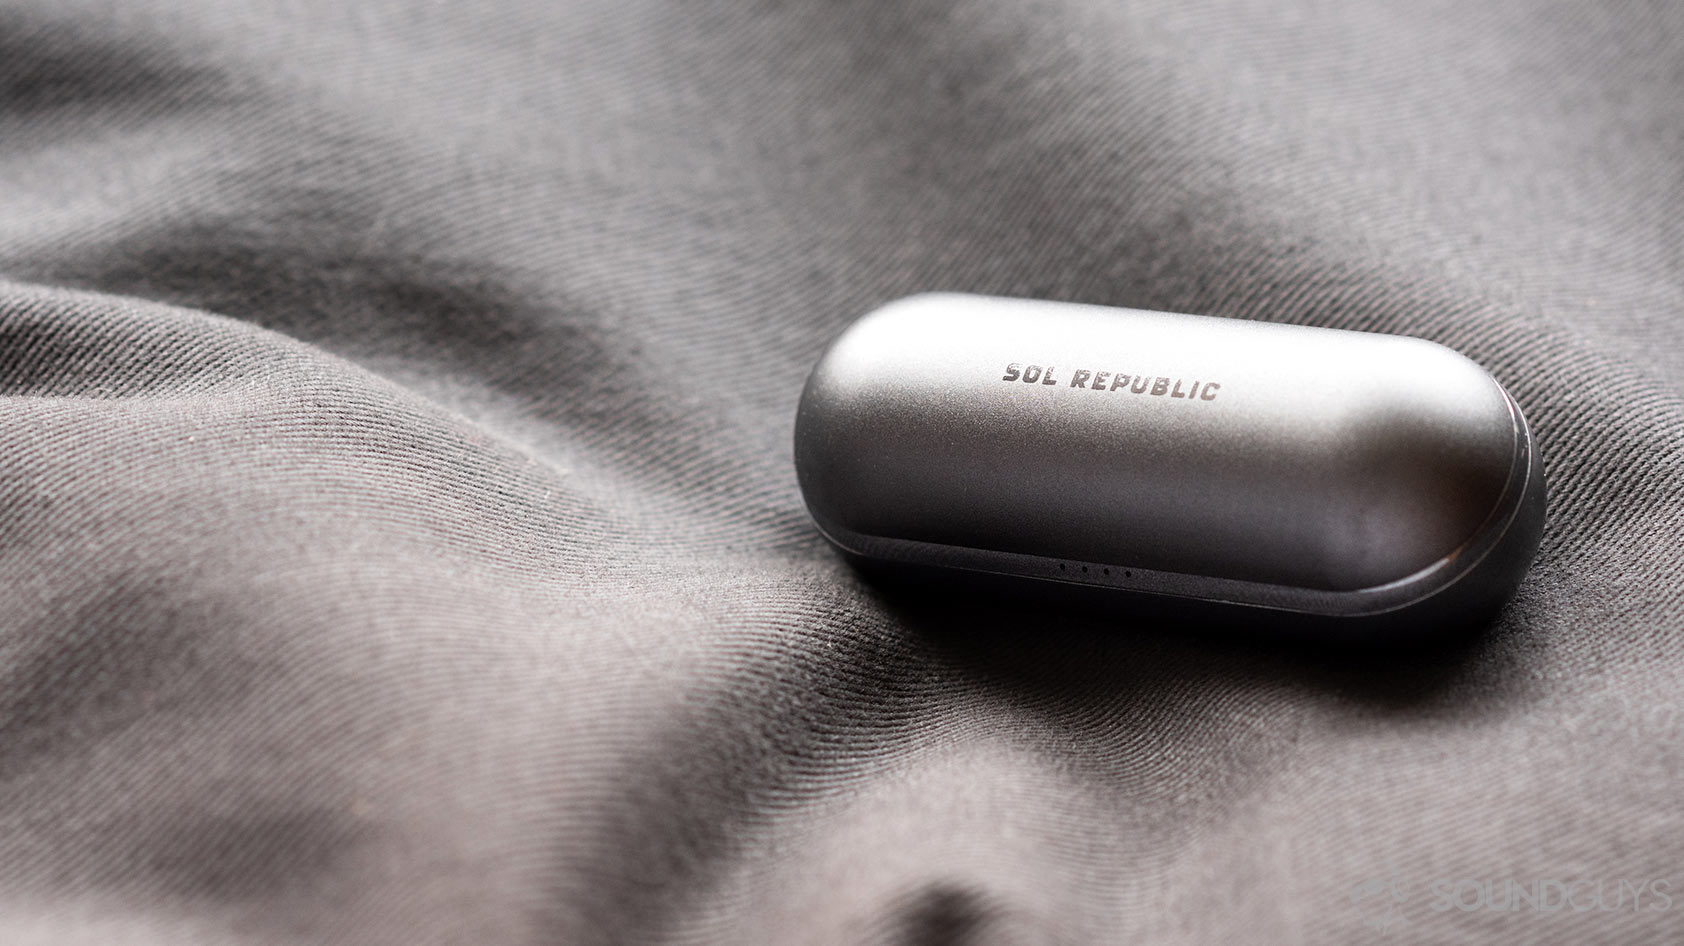 A photo of the Sol Republic Amps Air Plus true wireless noise canceling earbuds USB-C charging case.